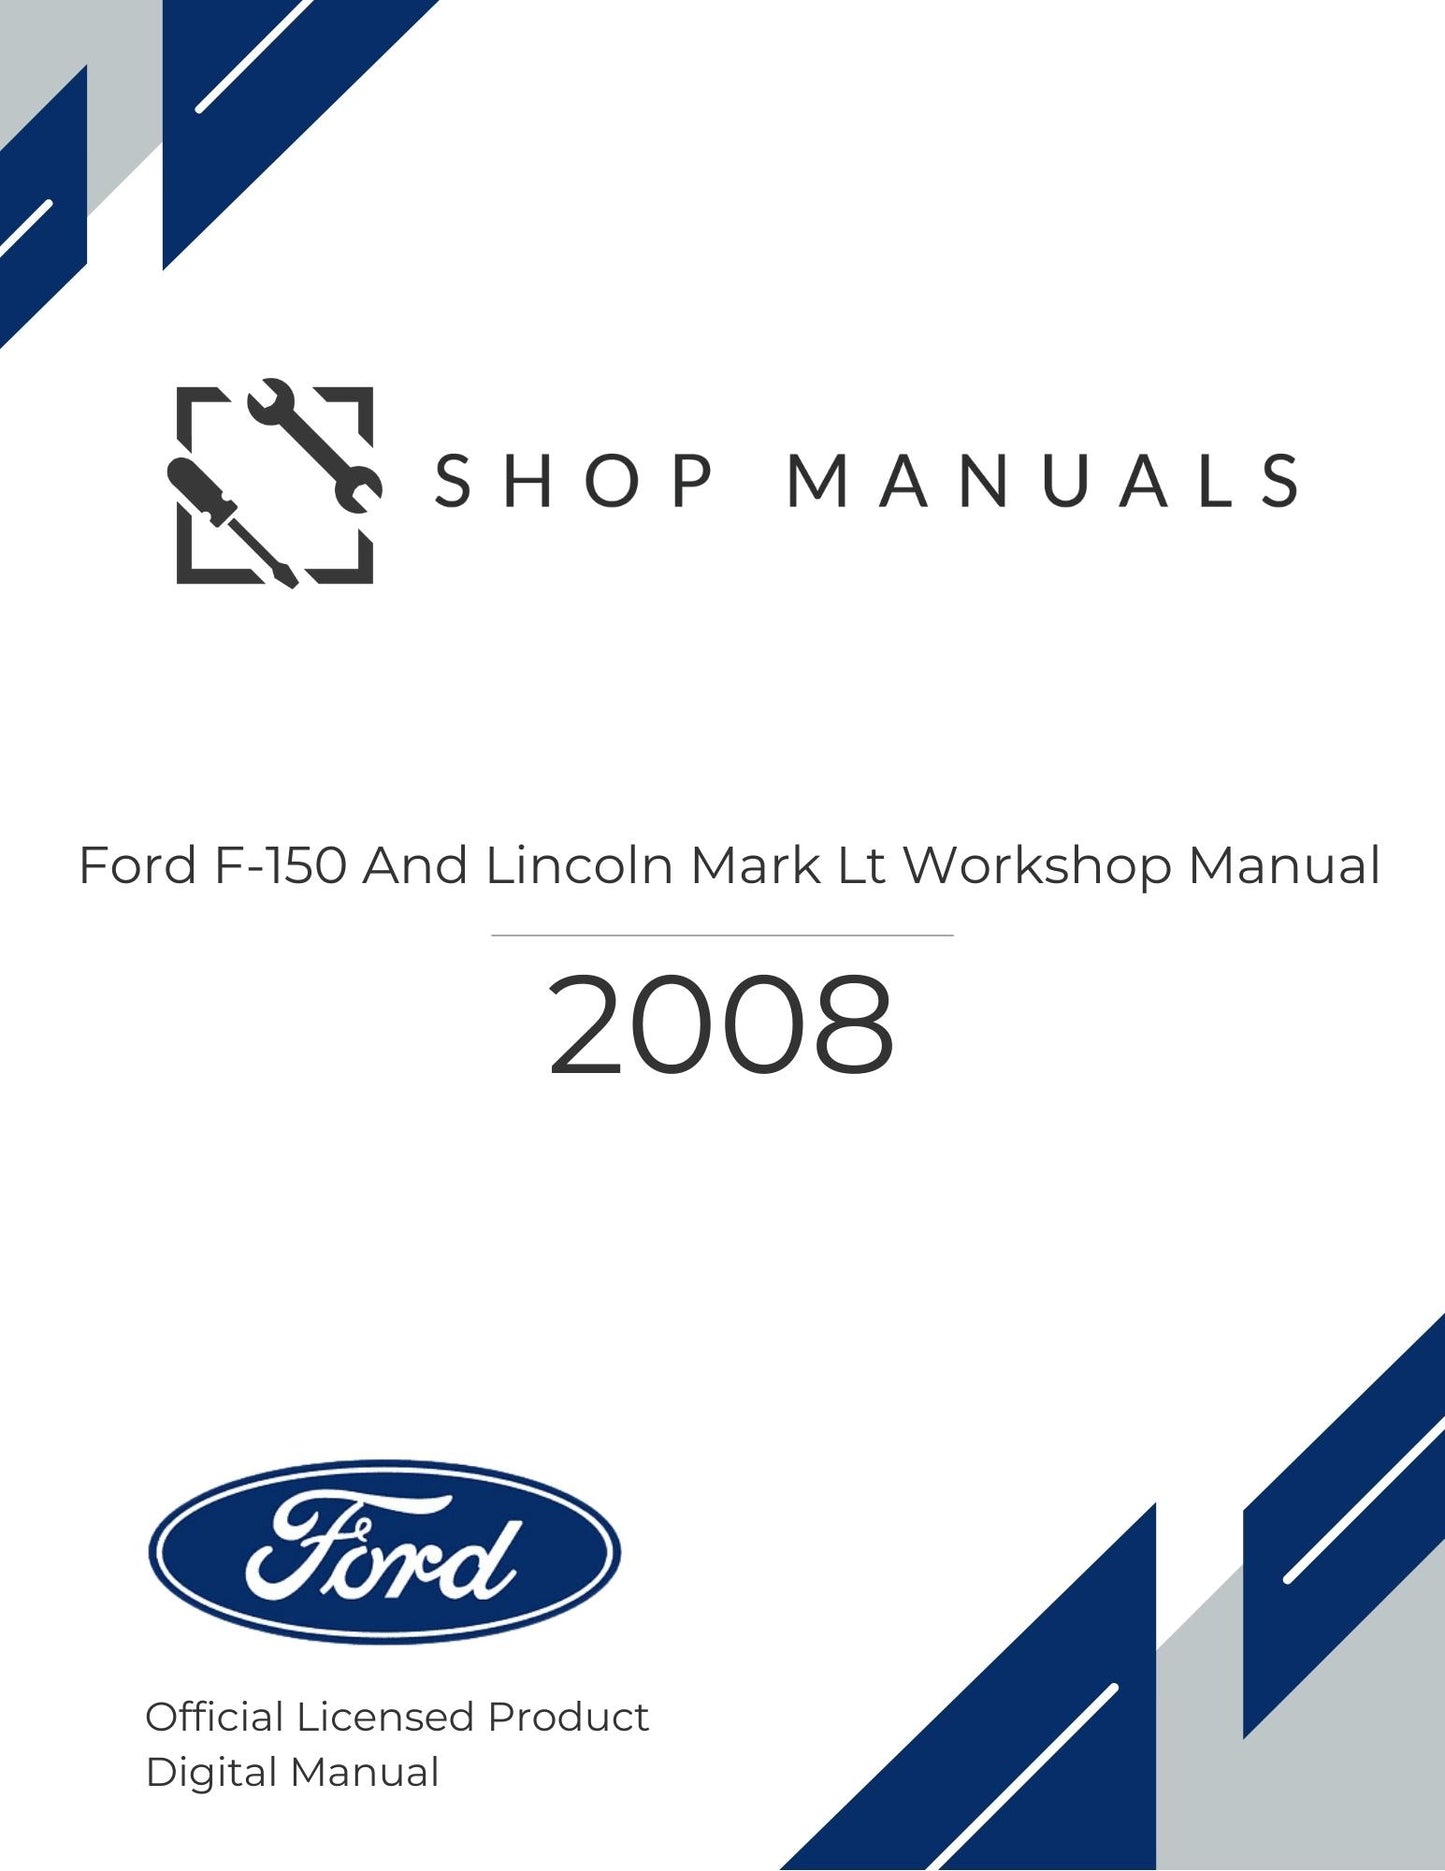 2008 Ford F-150 and Lincoln Mark LT Workshop Manual